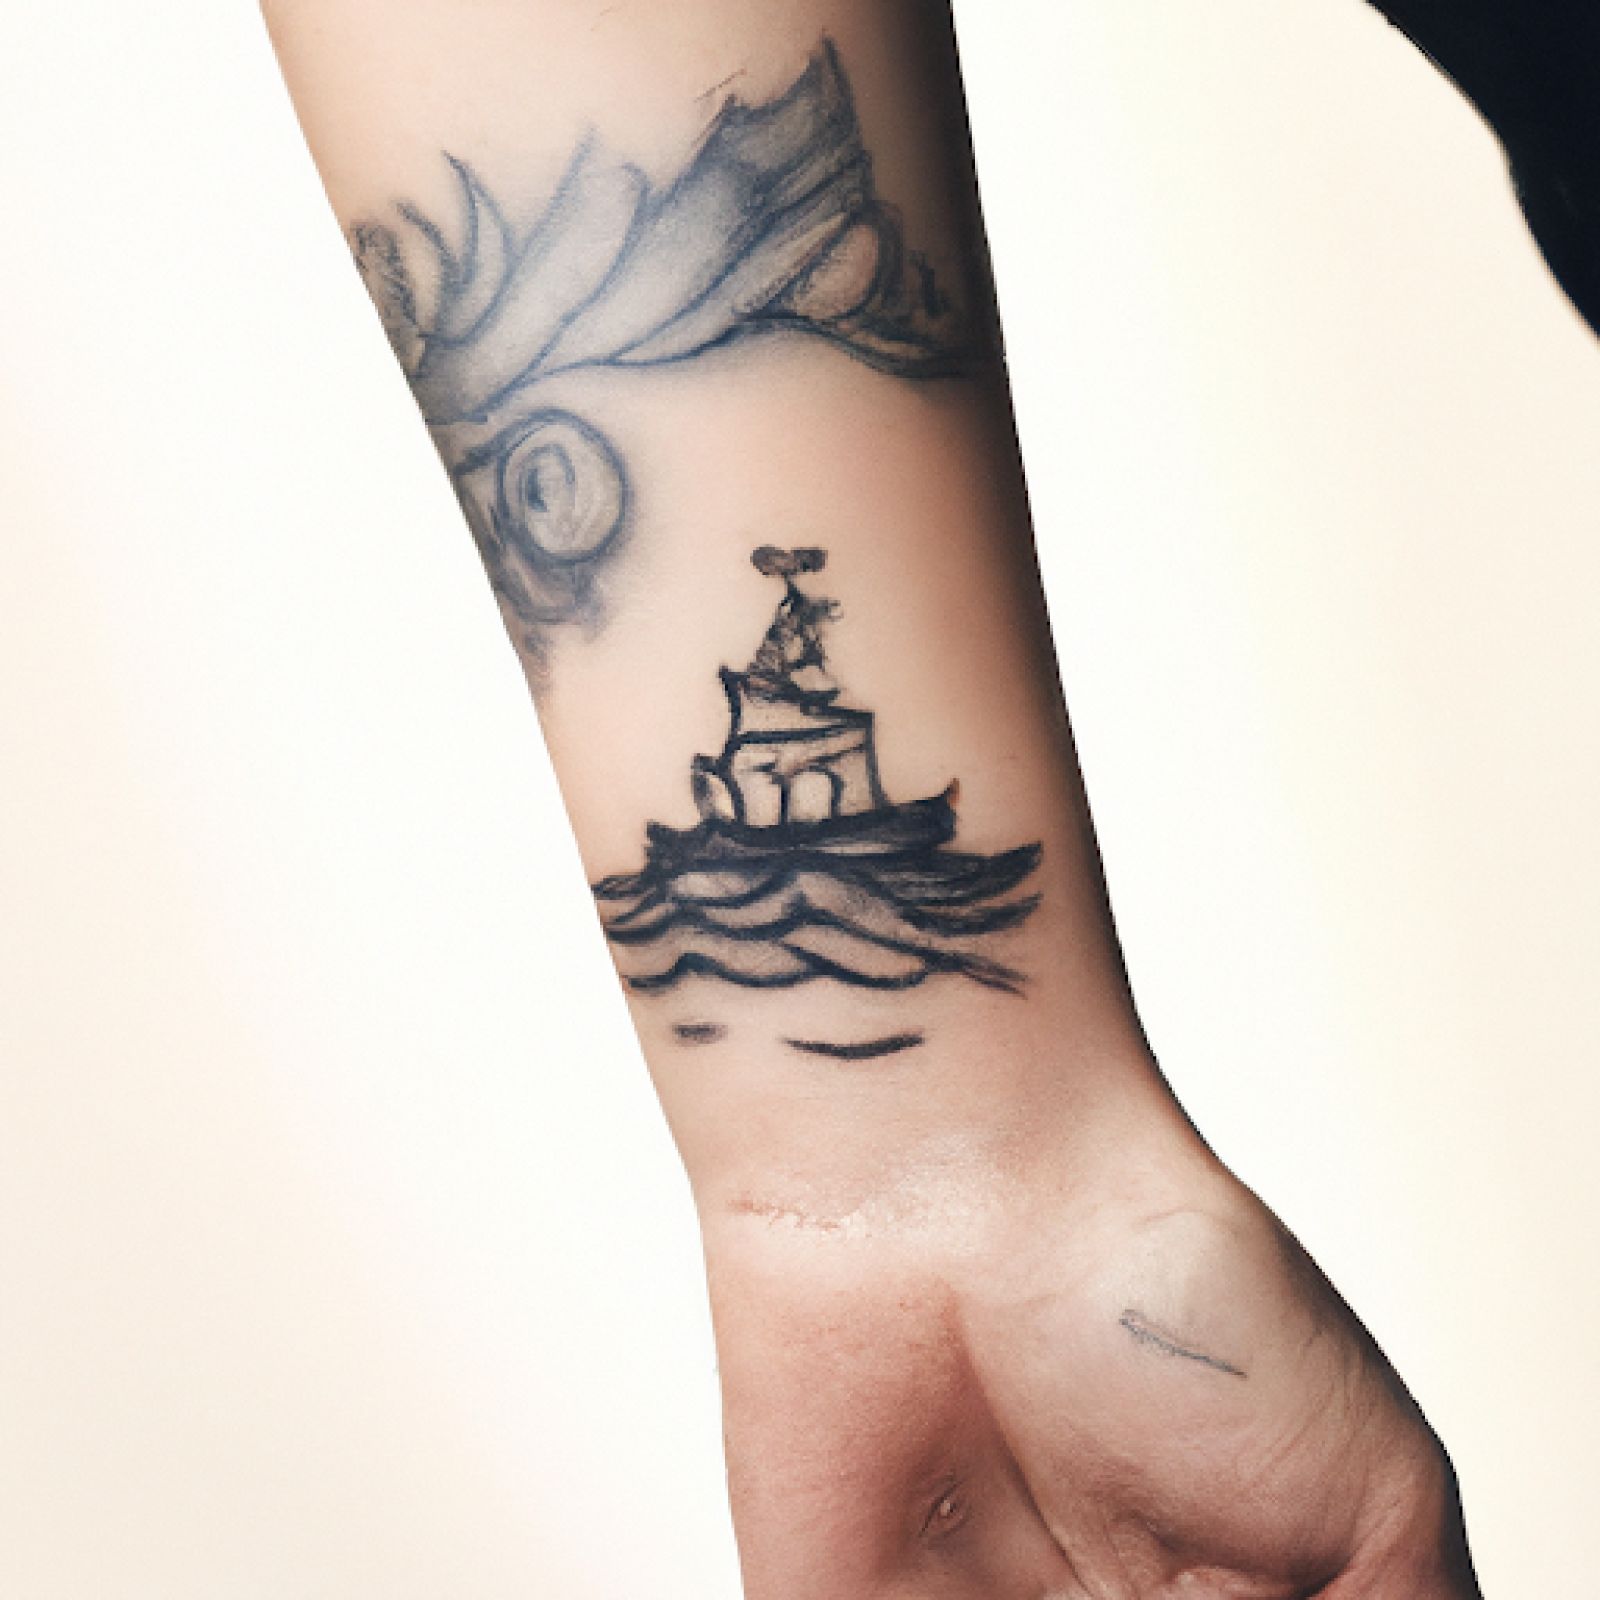 Ship tattoo on hand for women